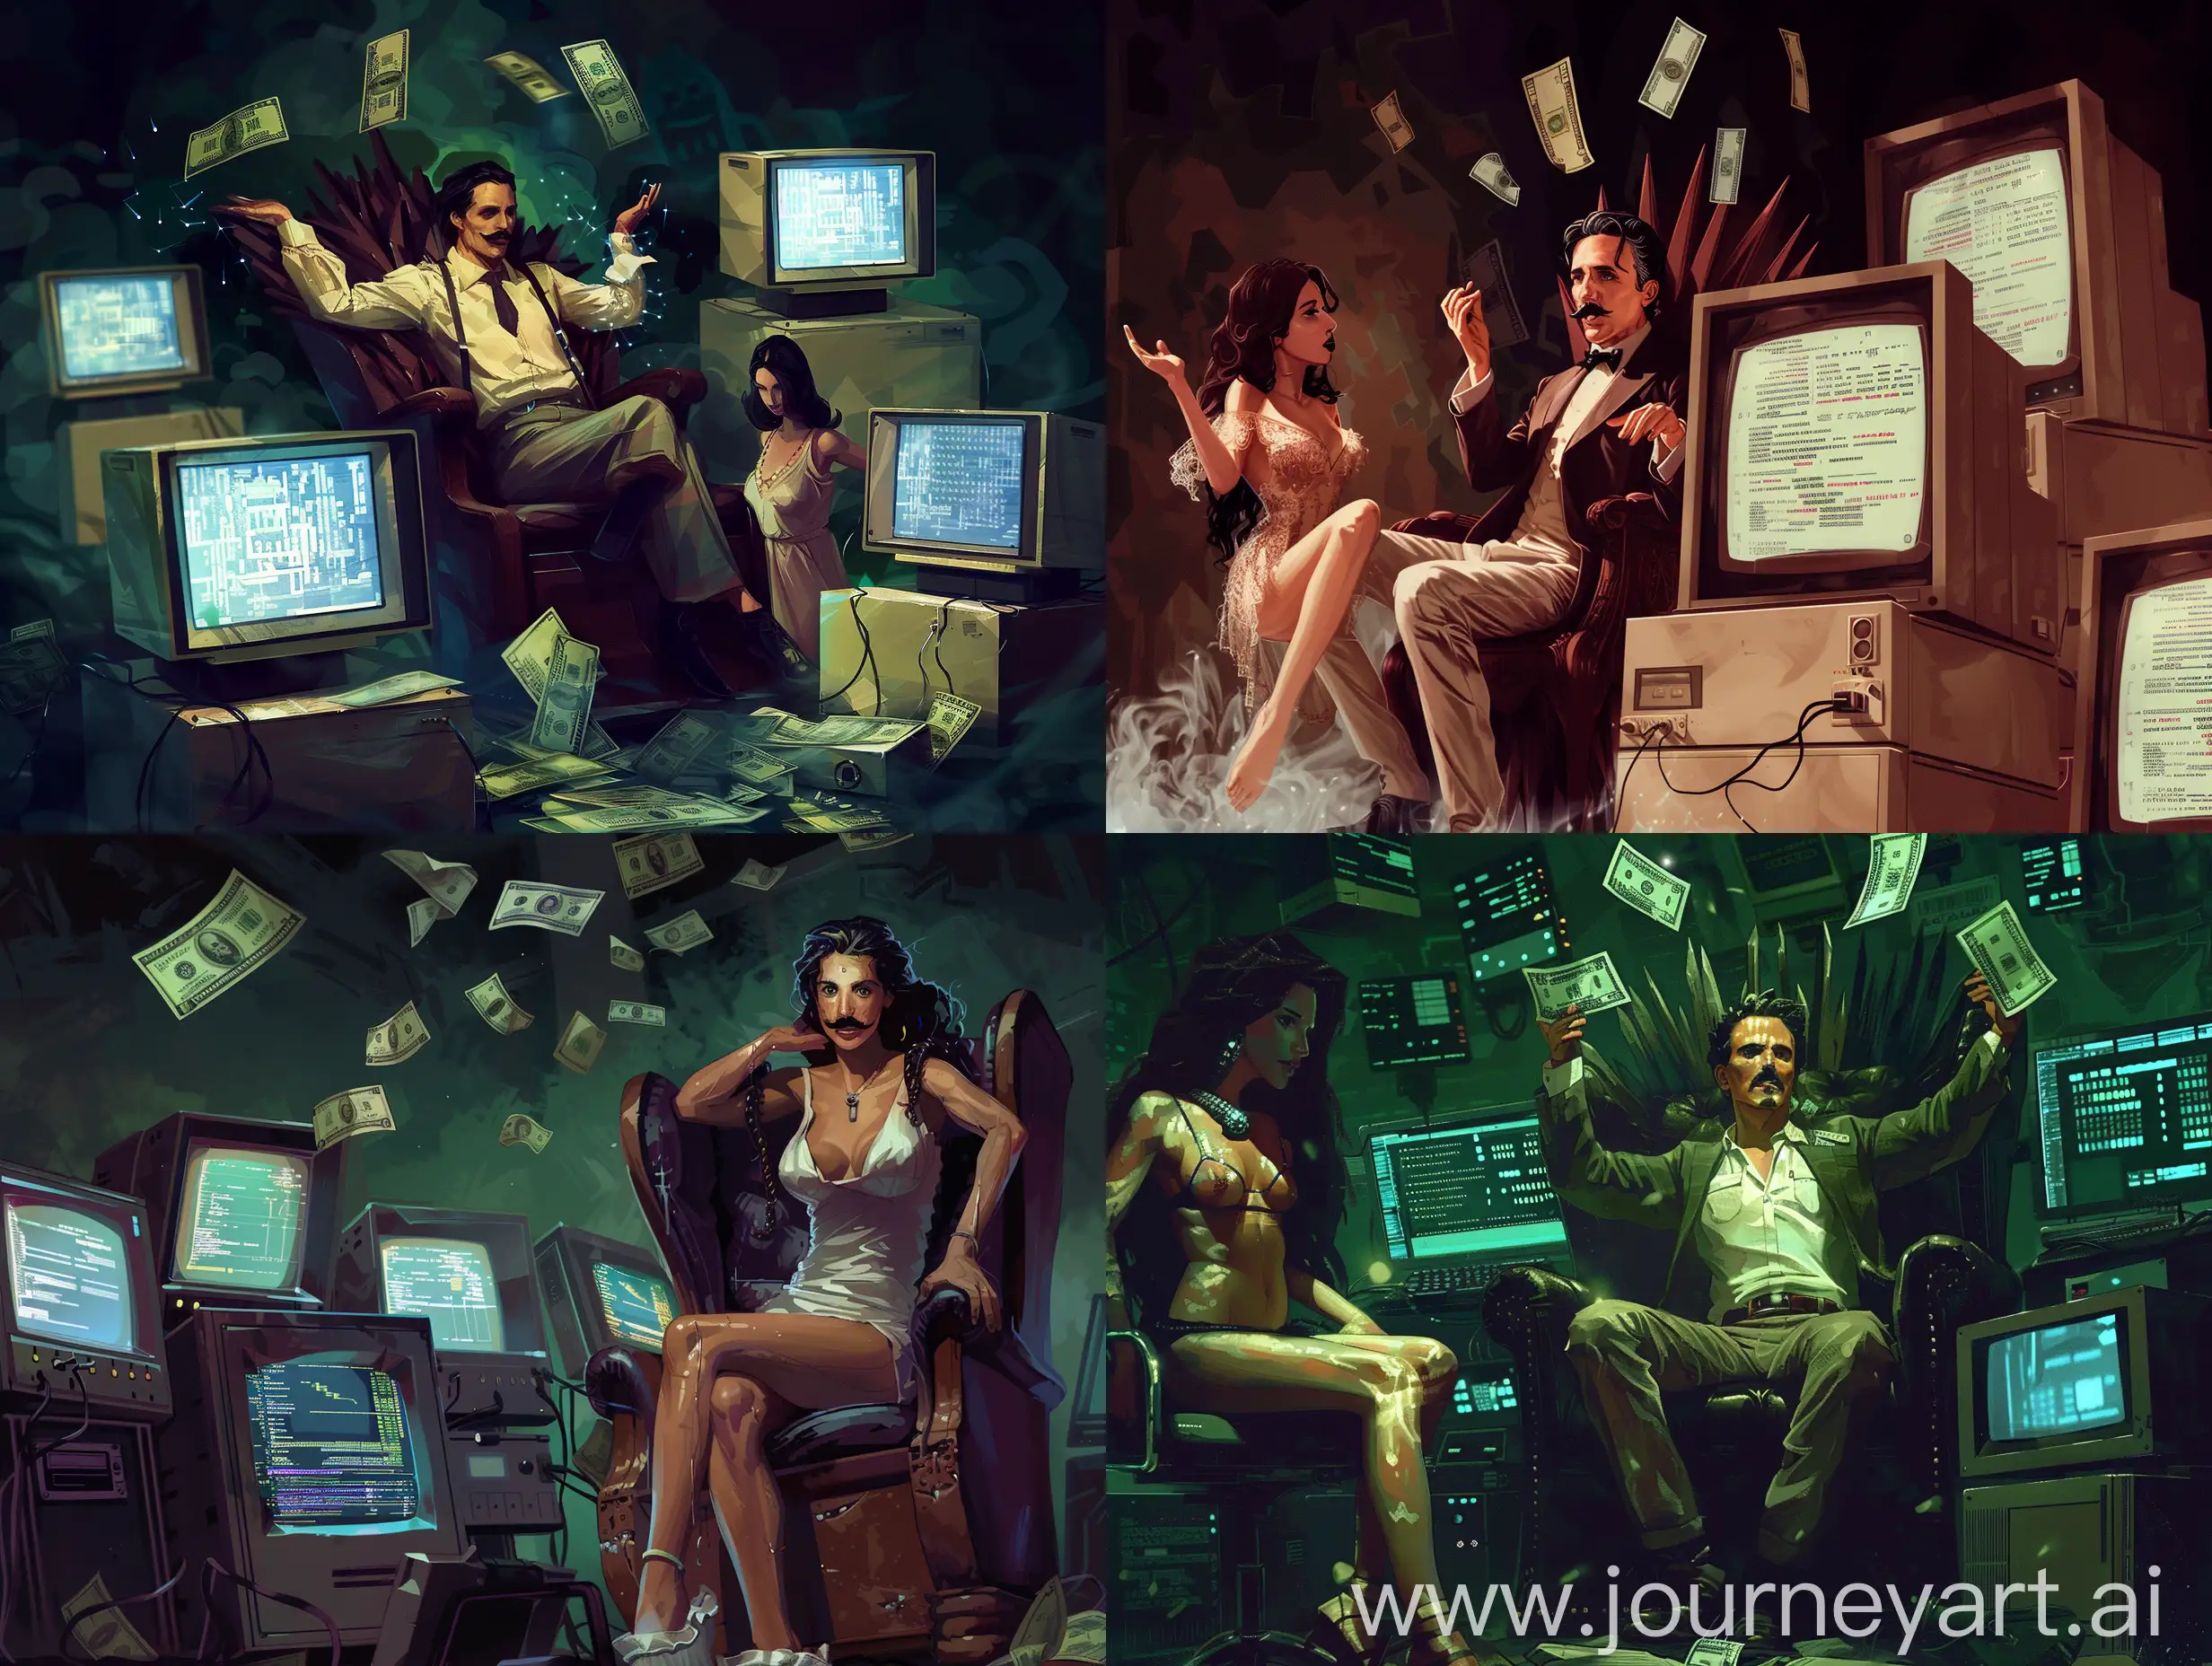 Nikola Tesla became an IT specialist. He sits on a throne among computers and throws money around. The computers show the program code. There is a gorgeous girl standing next to me. Dark background. In a painted style